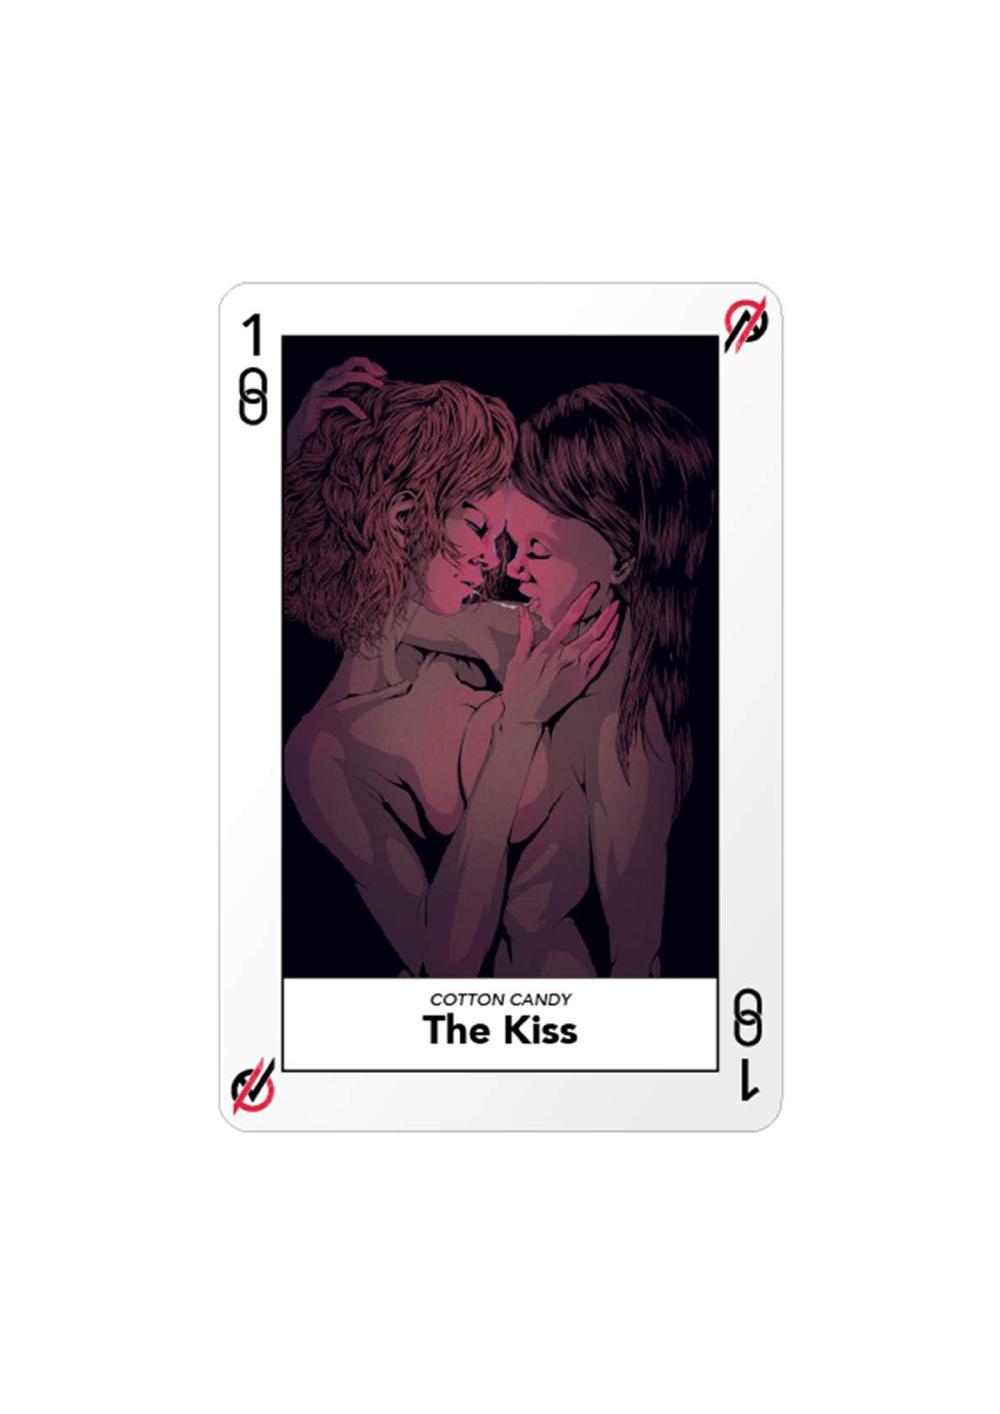 Certificate of Authenticity and Consignment - The Kiss